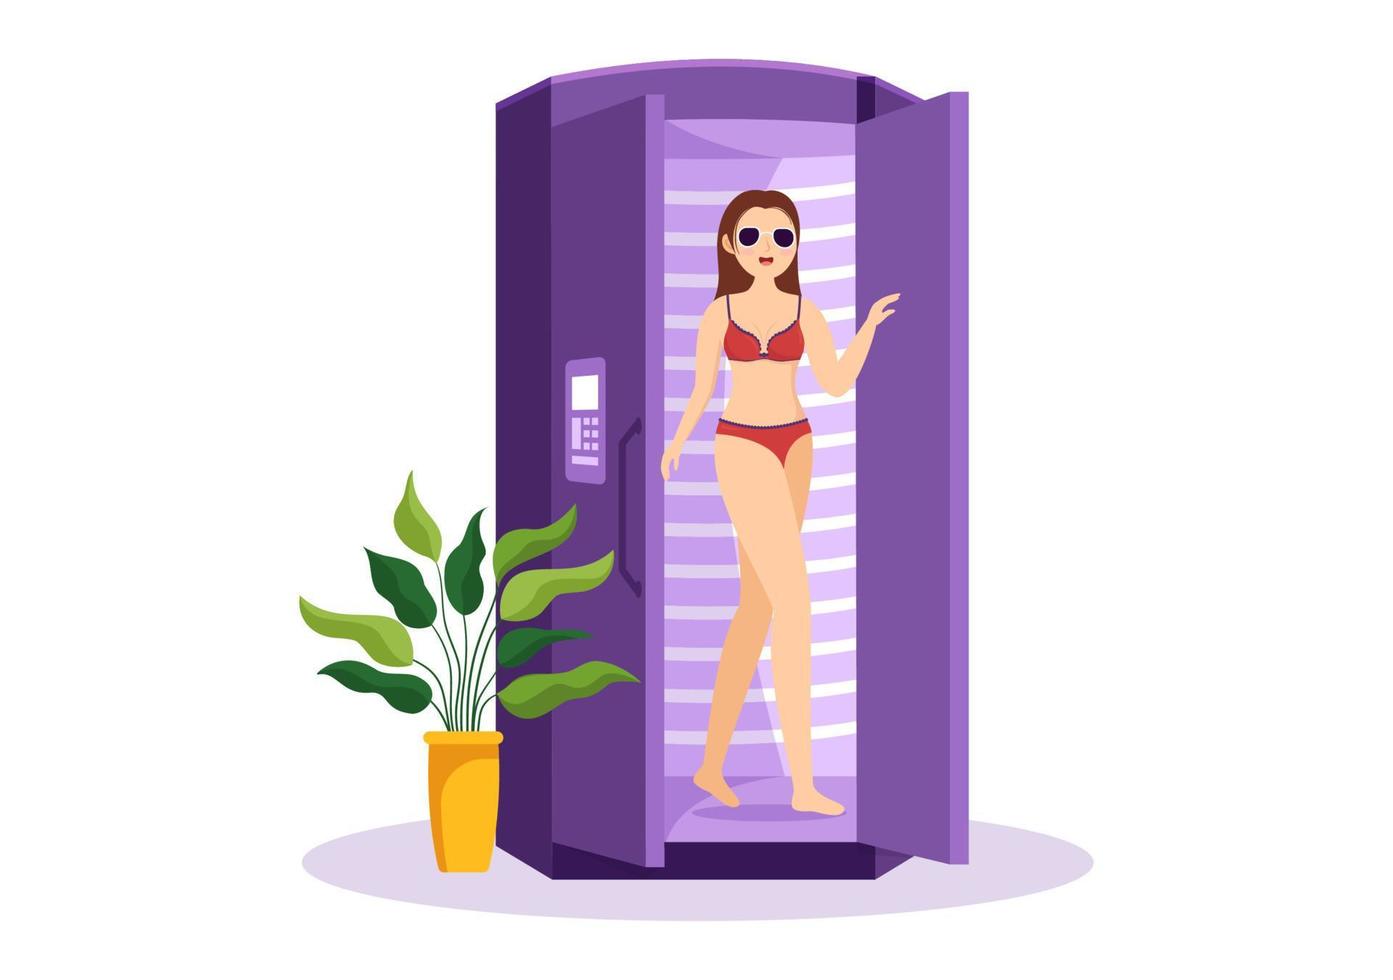 Tanning Bed Procedure to Get Exotic Skin with Modern Technology at the Spa Salon Solarium in Flat Cartoon Hand Drawn Templates Illustration vector